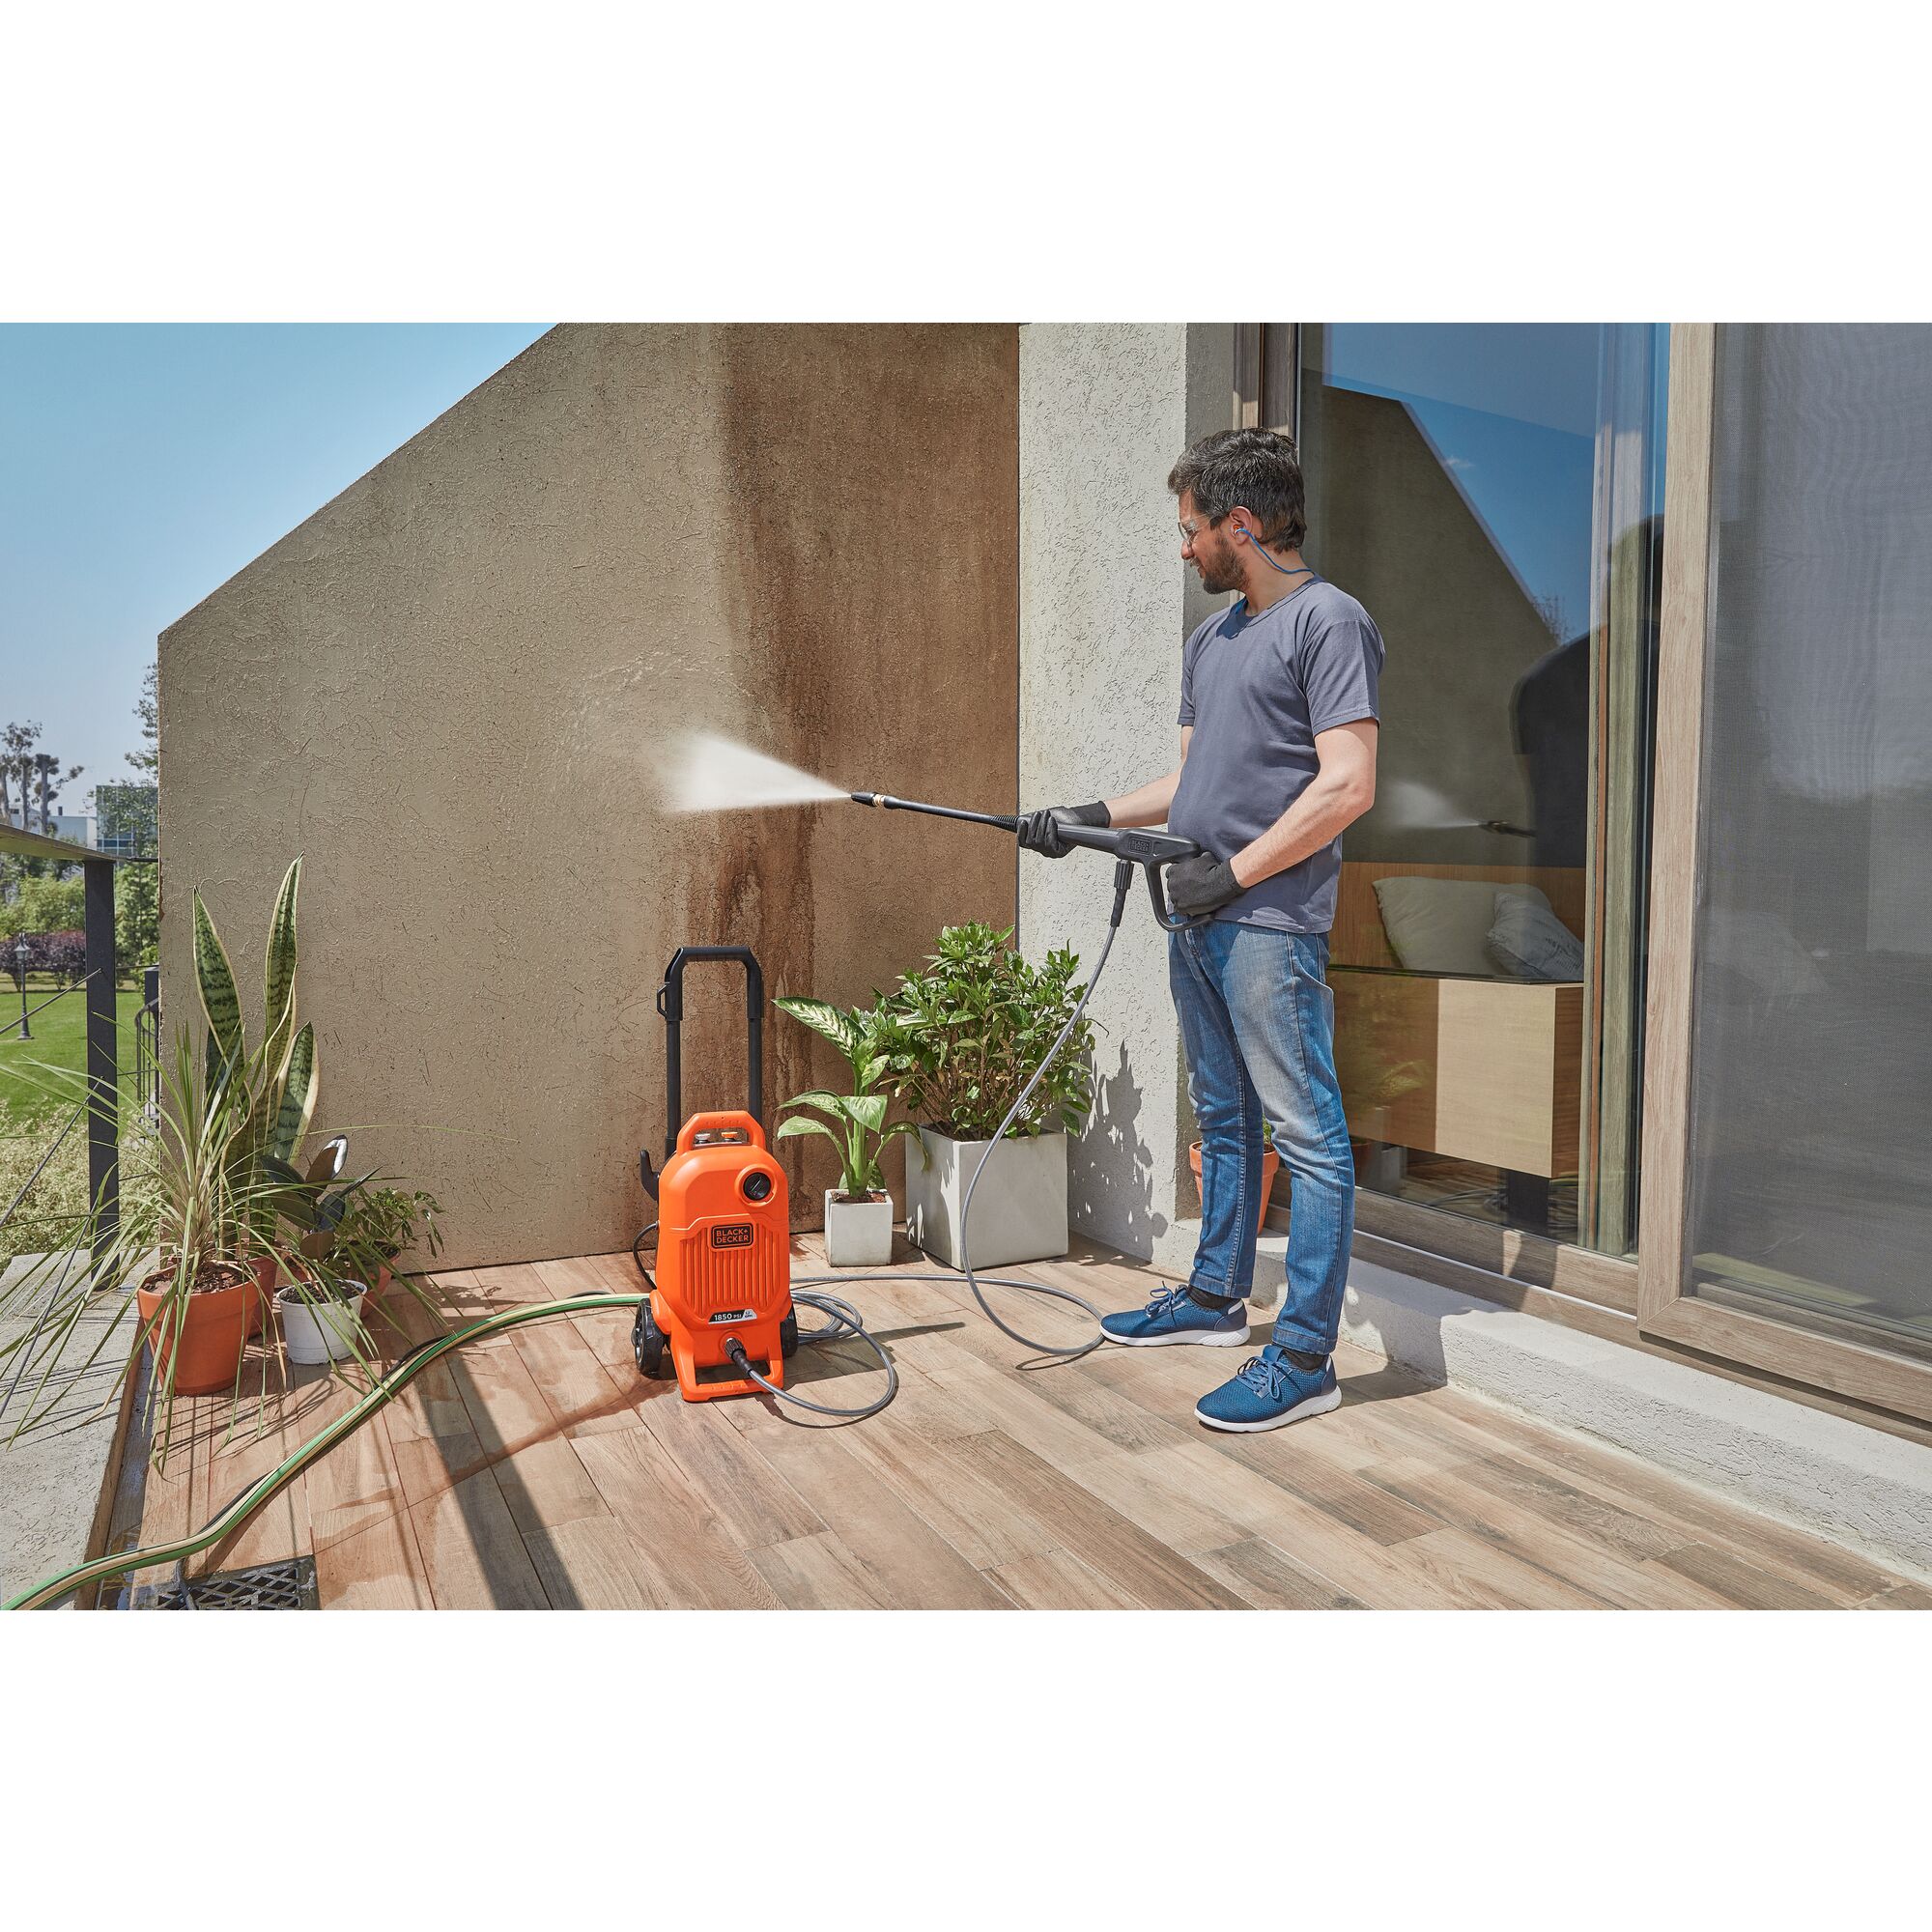 Man cleaning a porch wall with the BLACK+DECKER 1,850 MAX psi* pressure washer with turbo nozzle